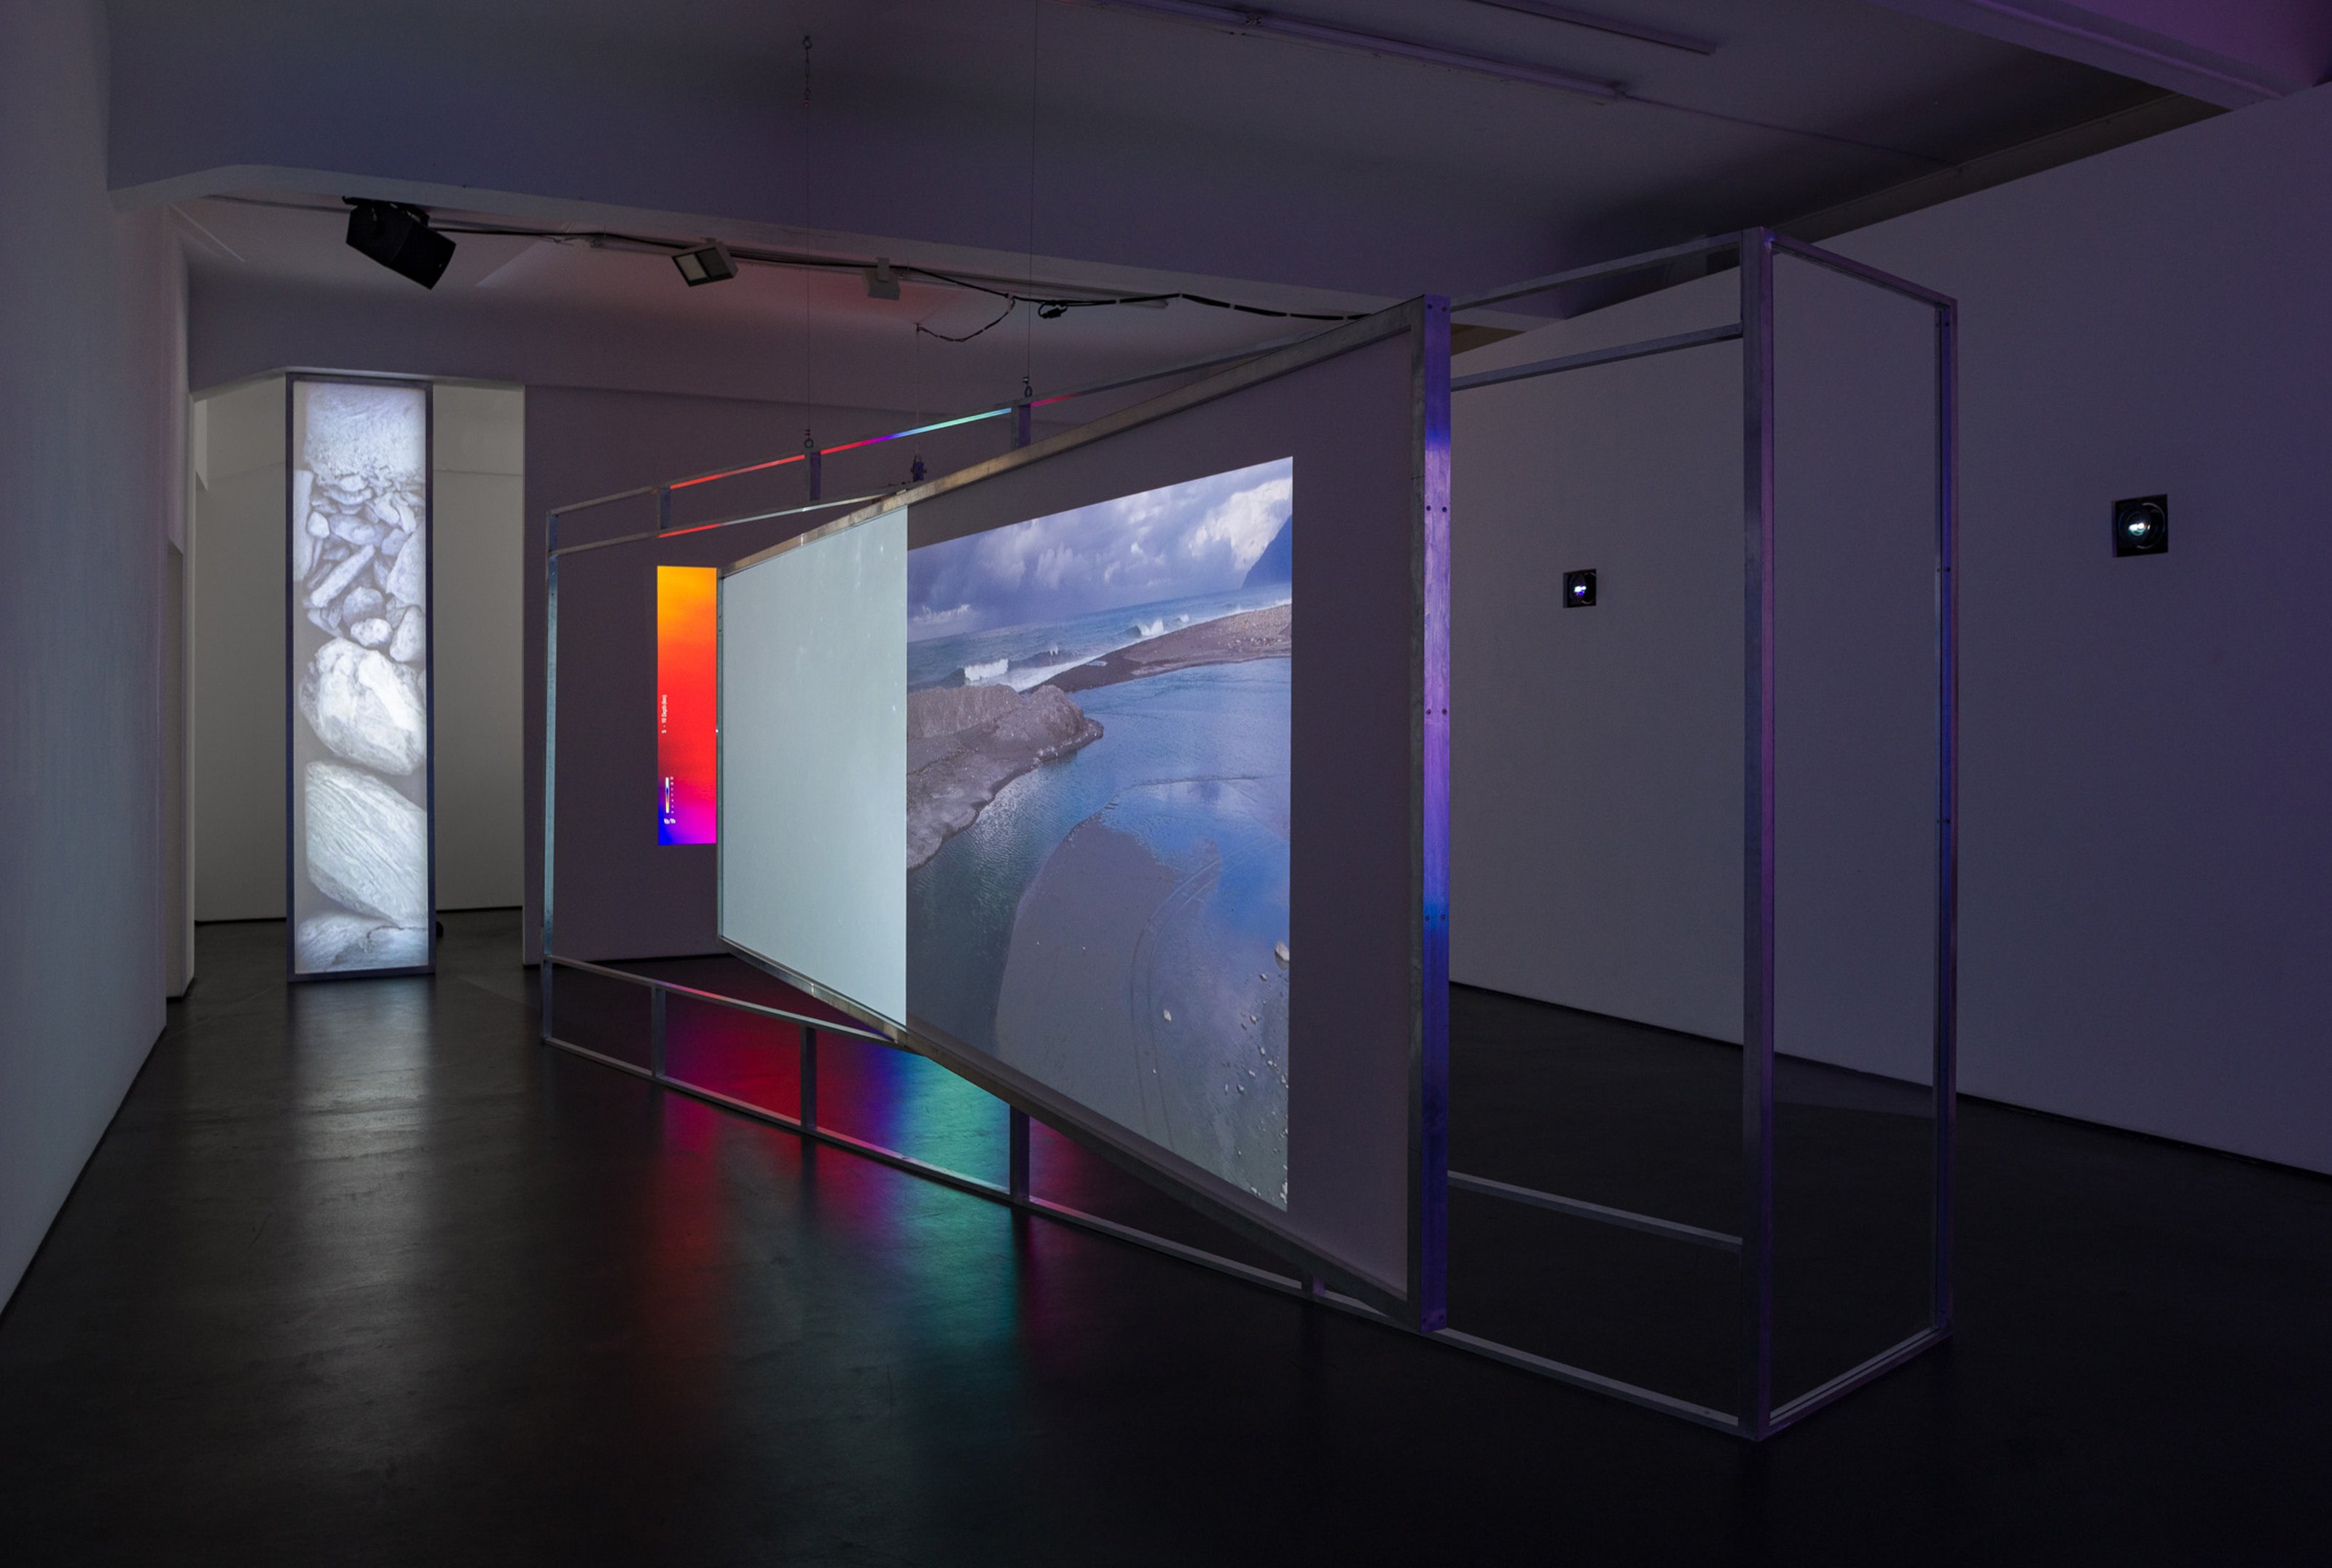 Video installation in gallery, one video is reflected on a screen installed within an aluminum frame, one is vertically placed on a wall, and a third projector screens an image on the wall directly